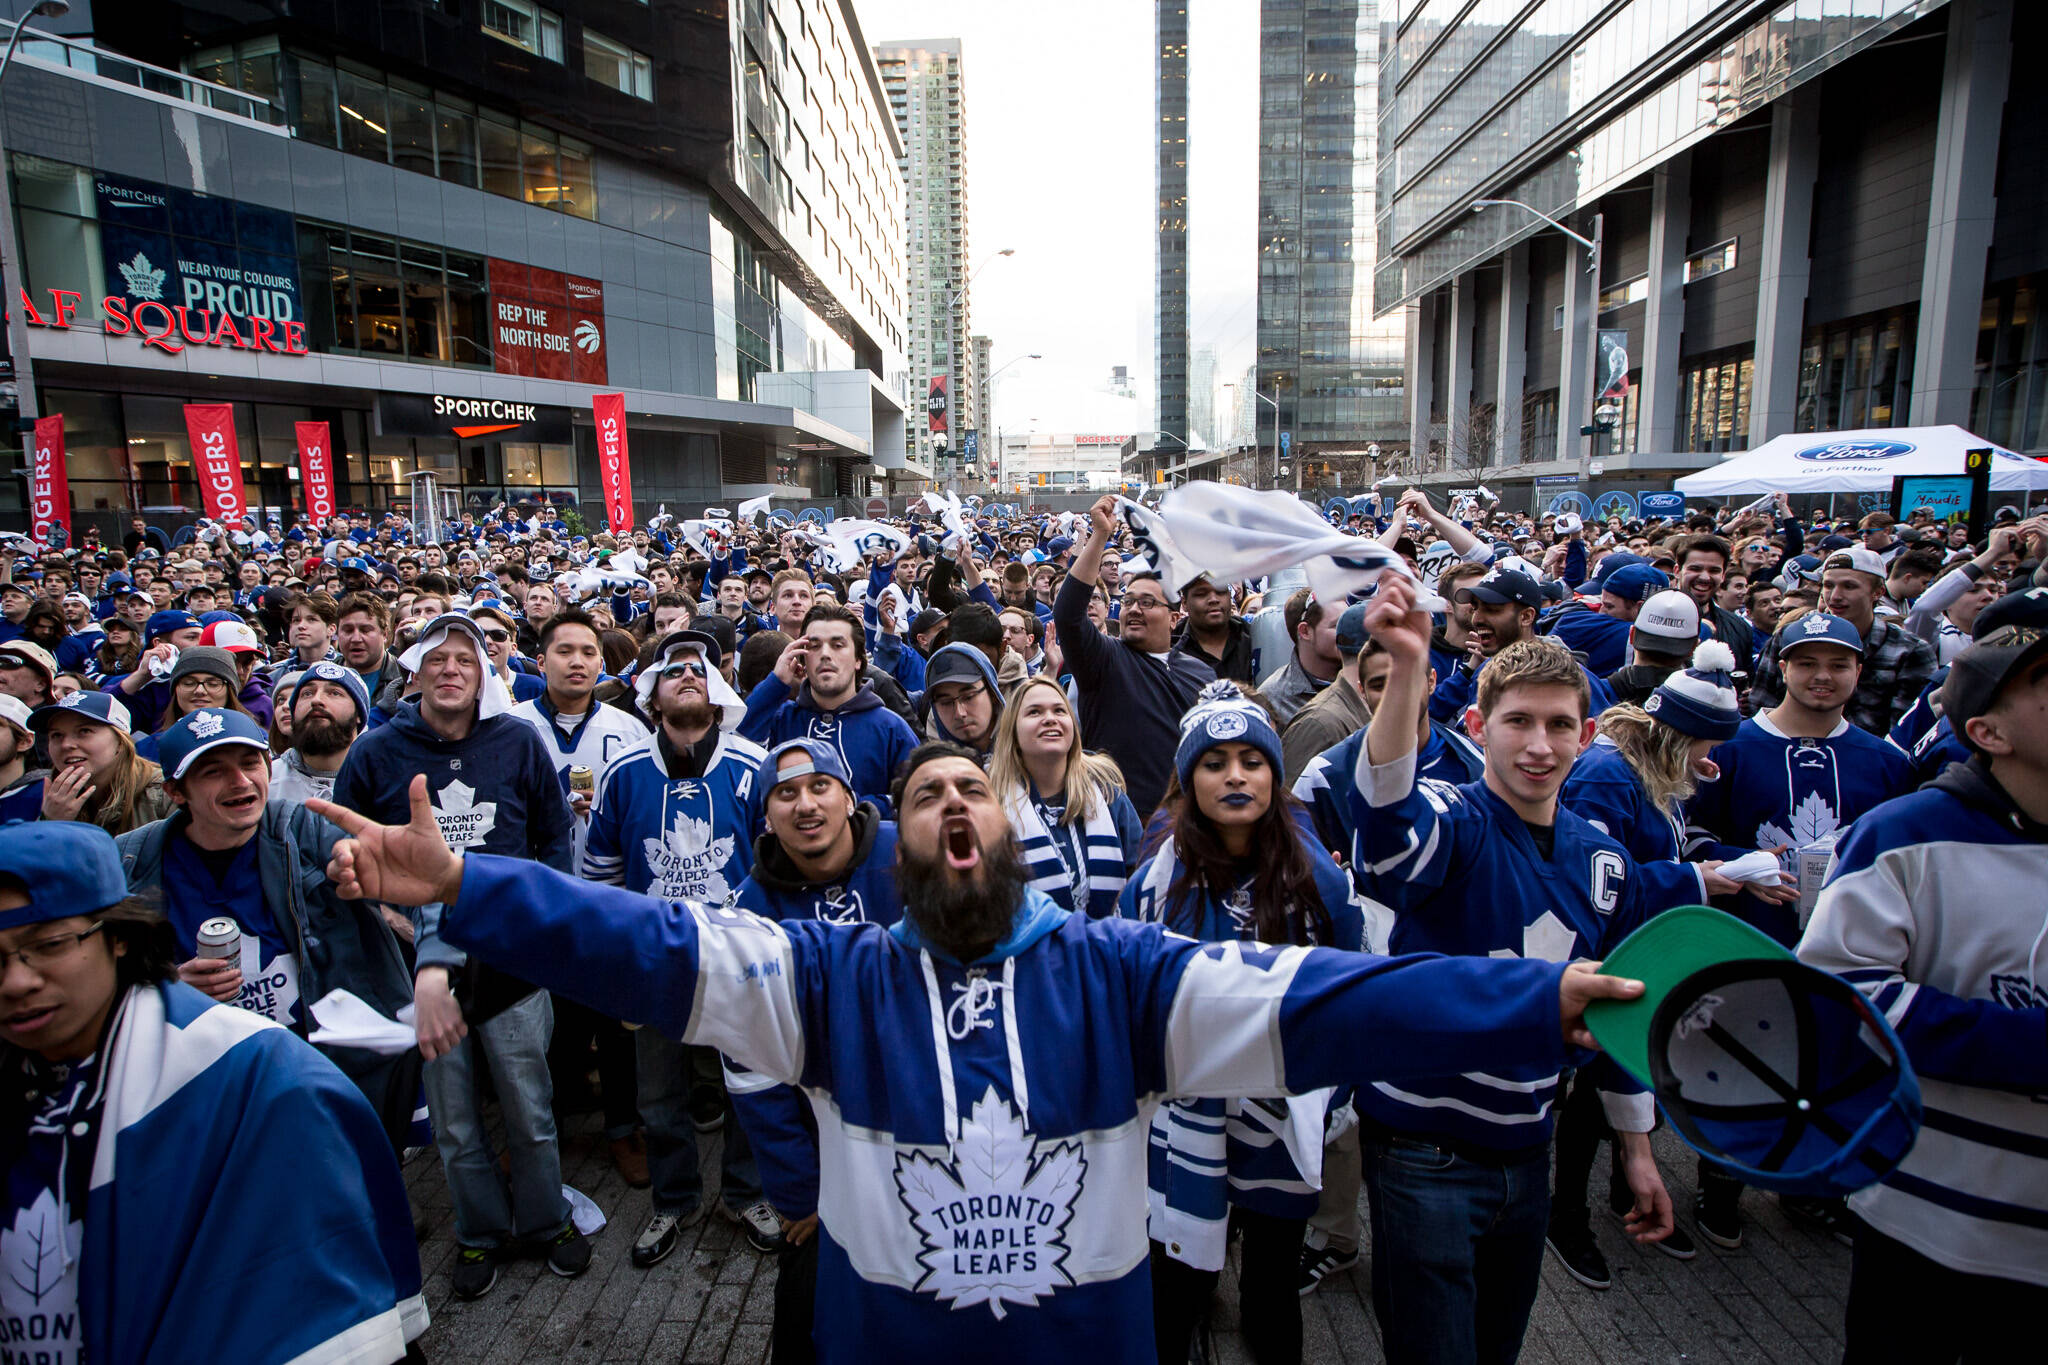 toronto maple leafs party